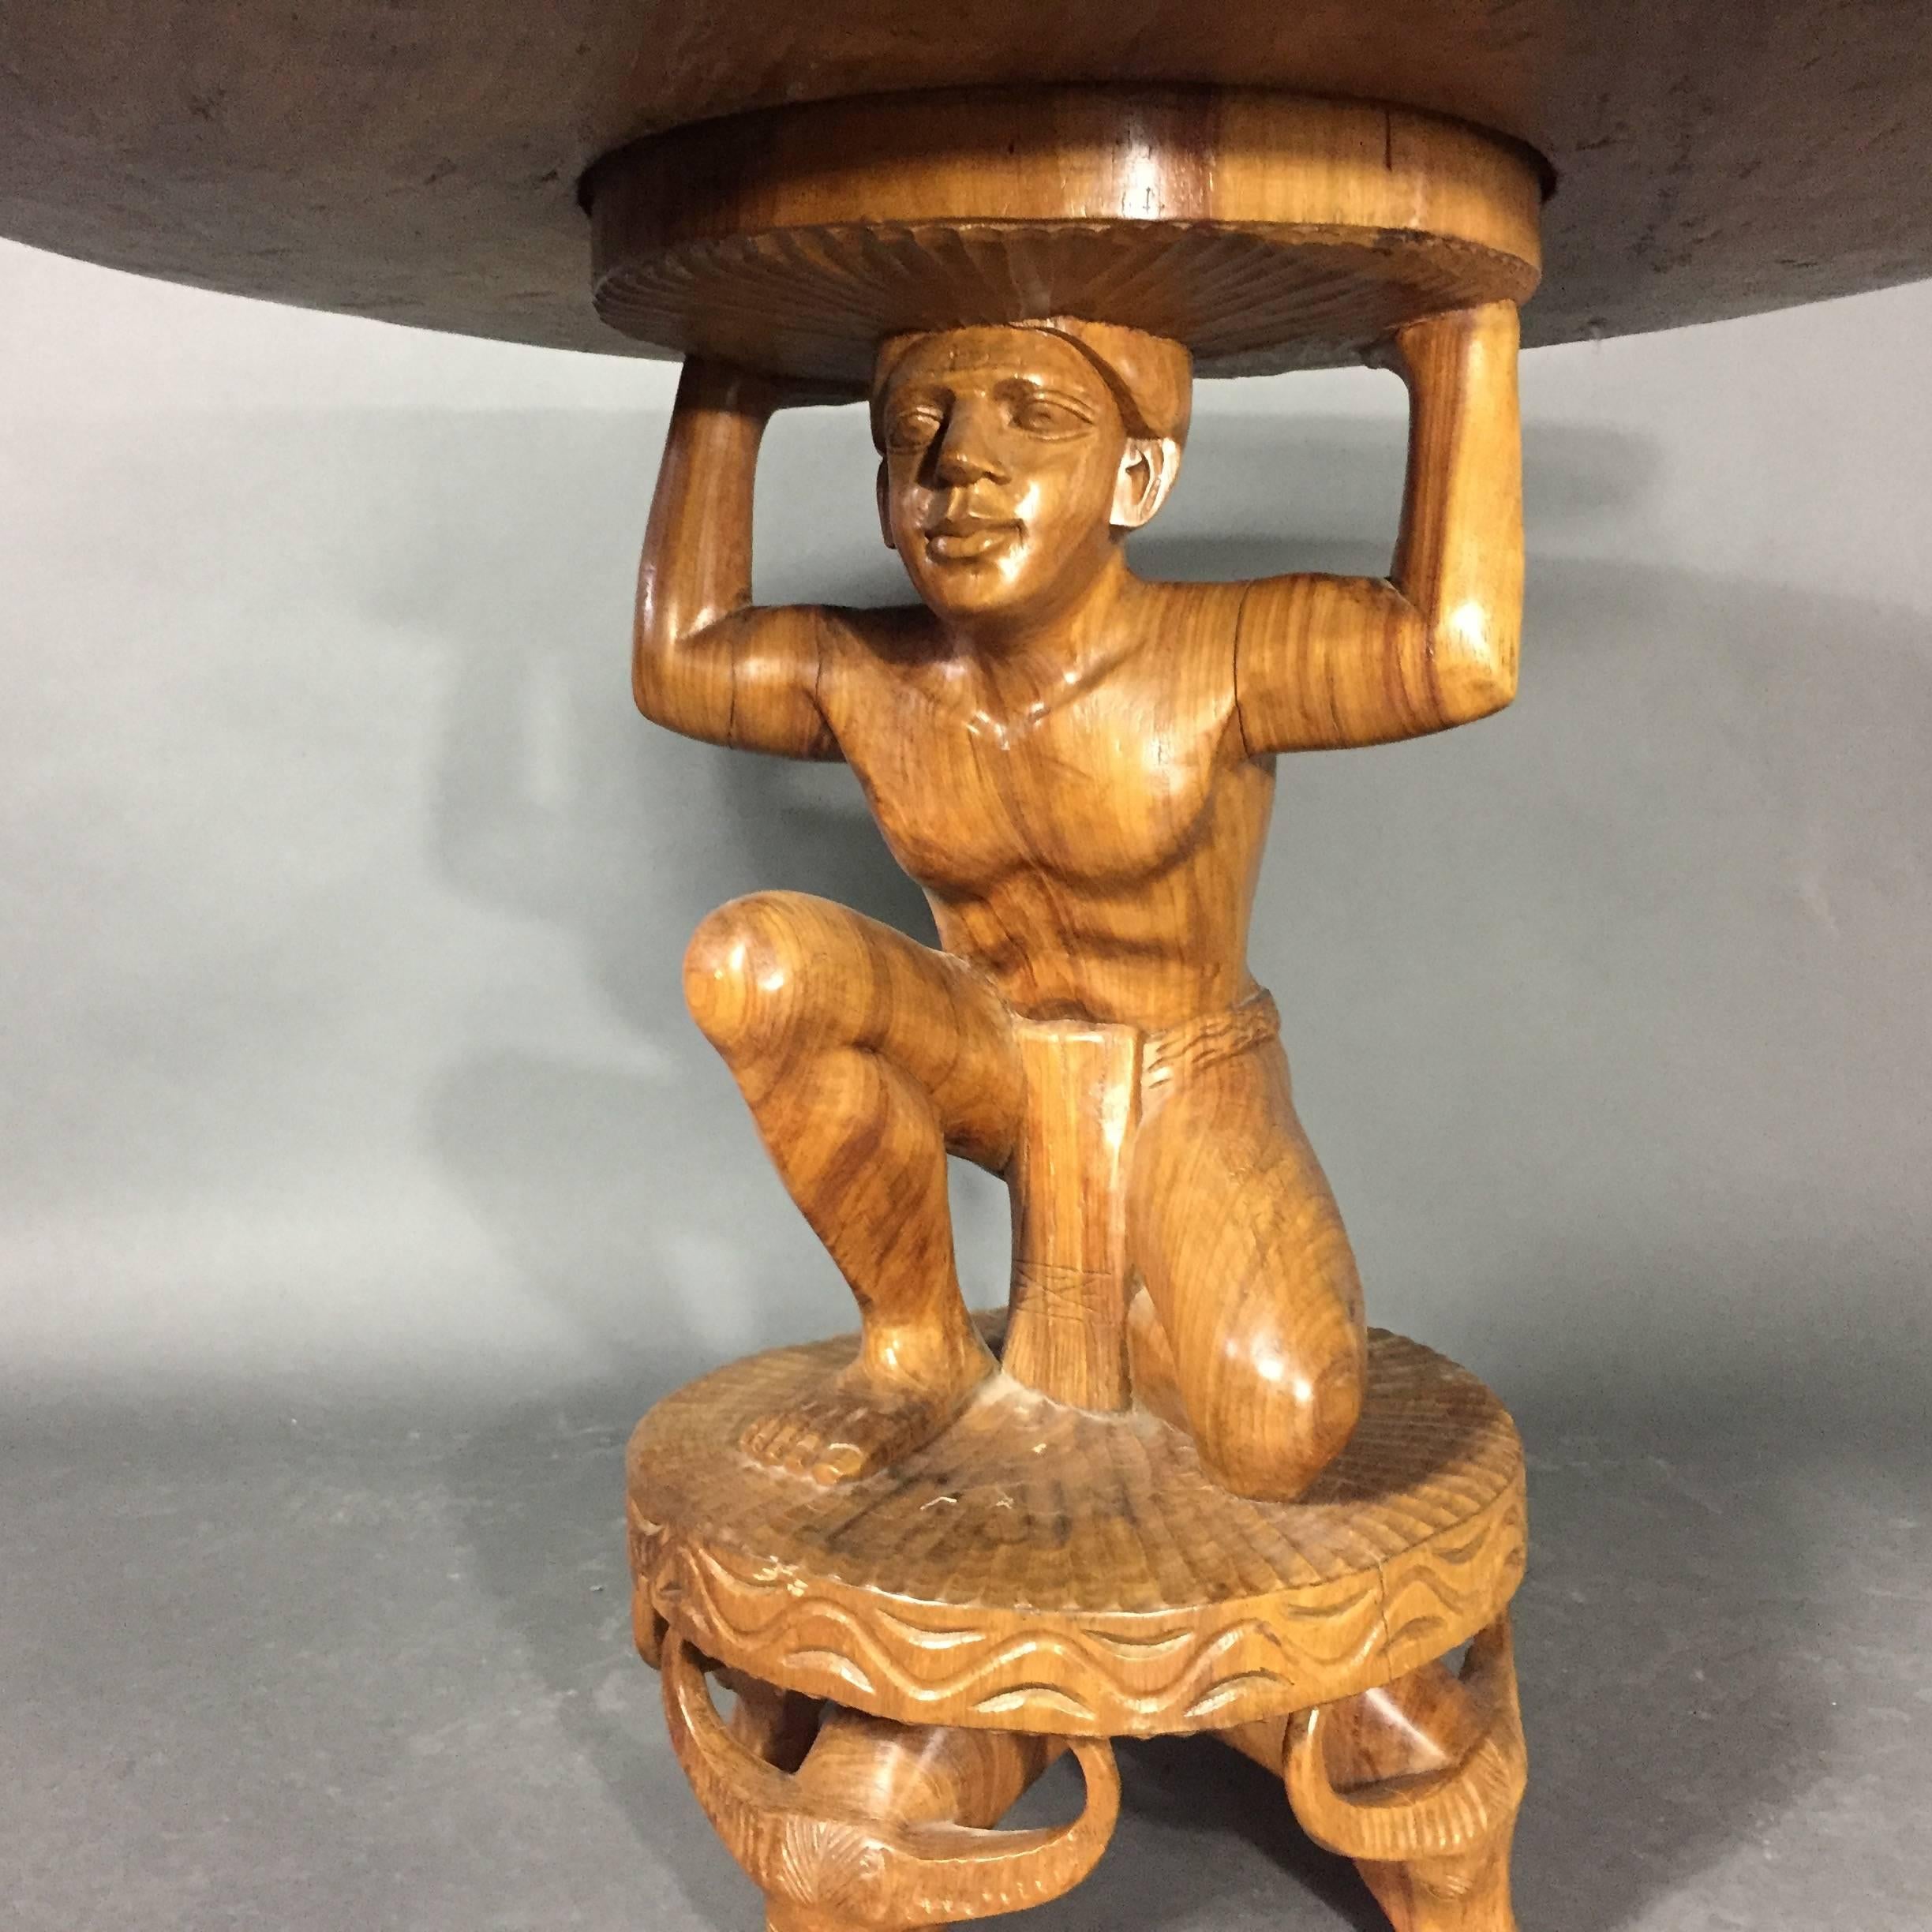 Really quite stunning - this early 1900s 39 inch diameter center table with hand-carved figural base and four steer-head legs has great presence. Top is an impressive one-piece of hardwood with carvings along edge and center. Chip to top edge -